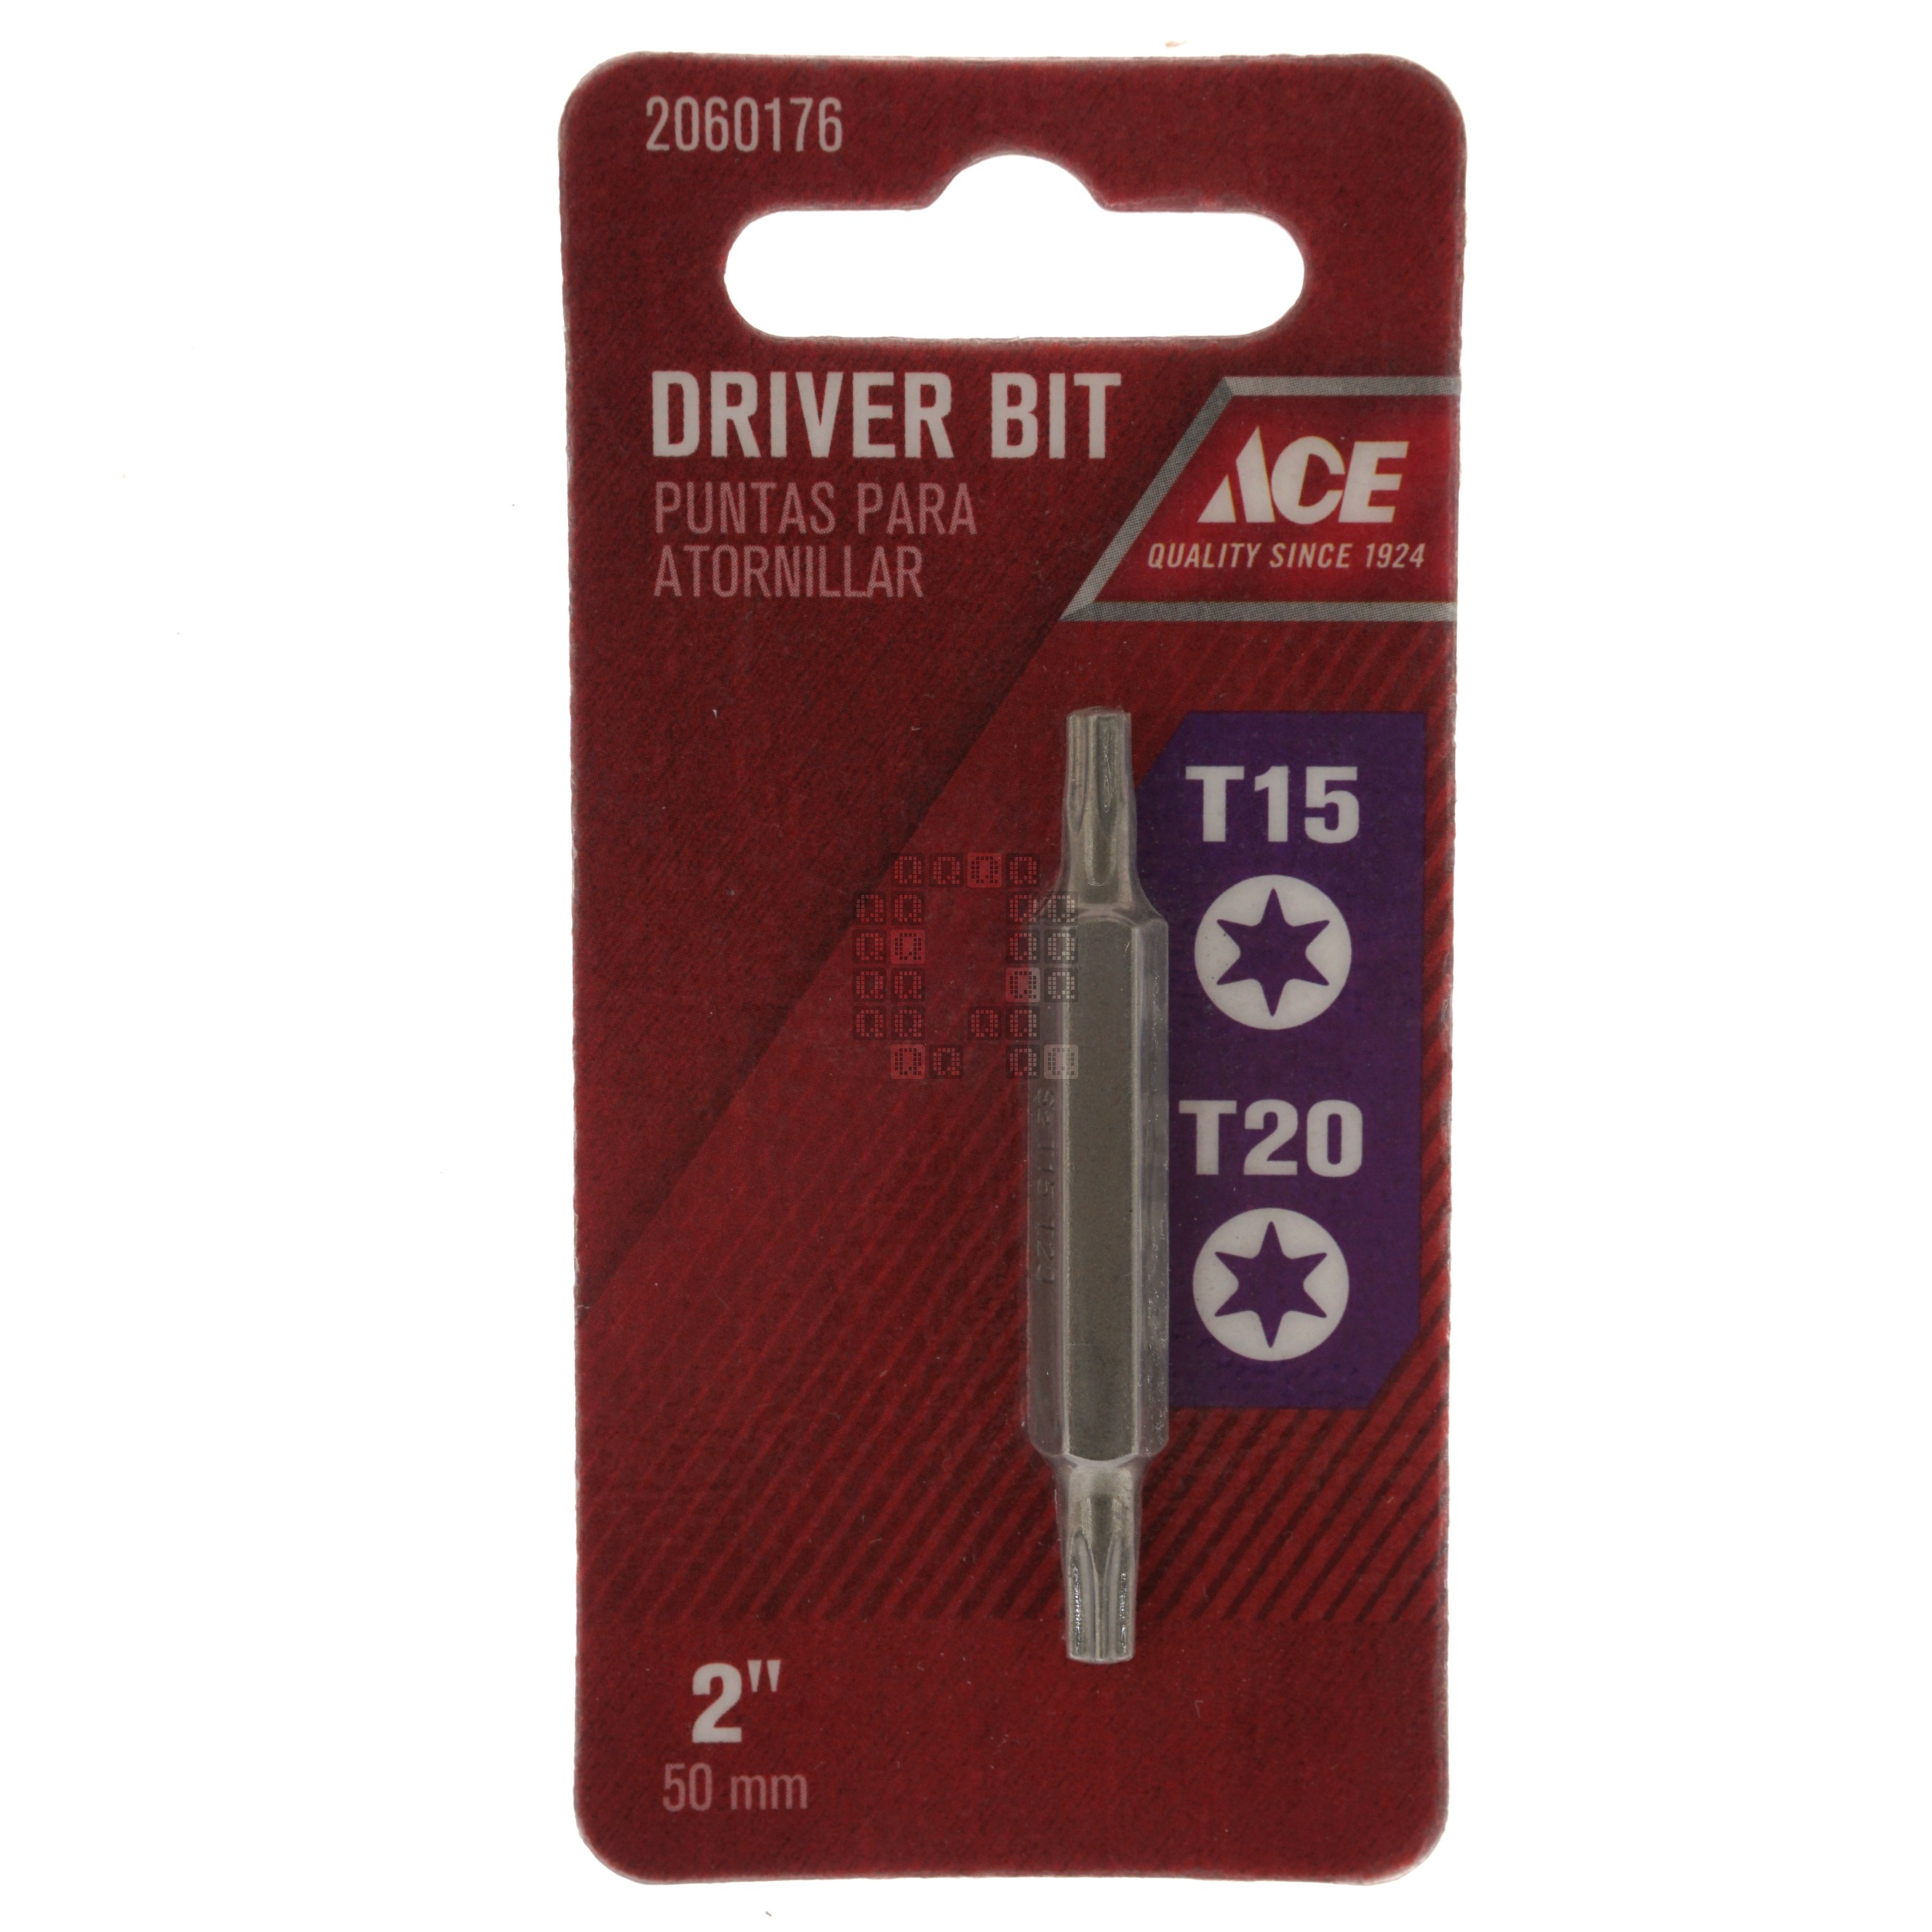 ACE Hardware 2060176 T15 / T20 TORX Double Ended Driver Bit, 2" Length, 1/4" Hex Drive